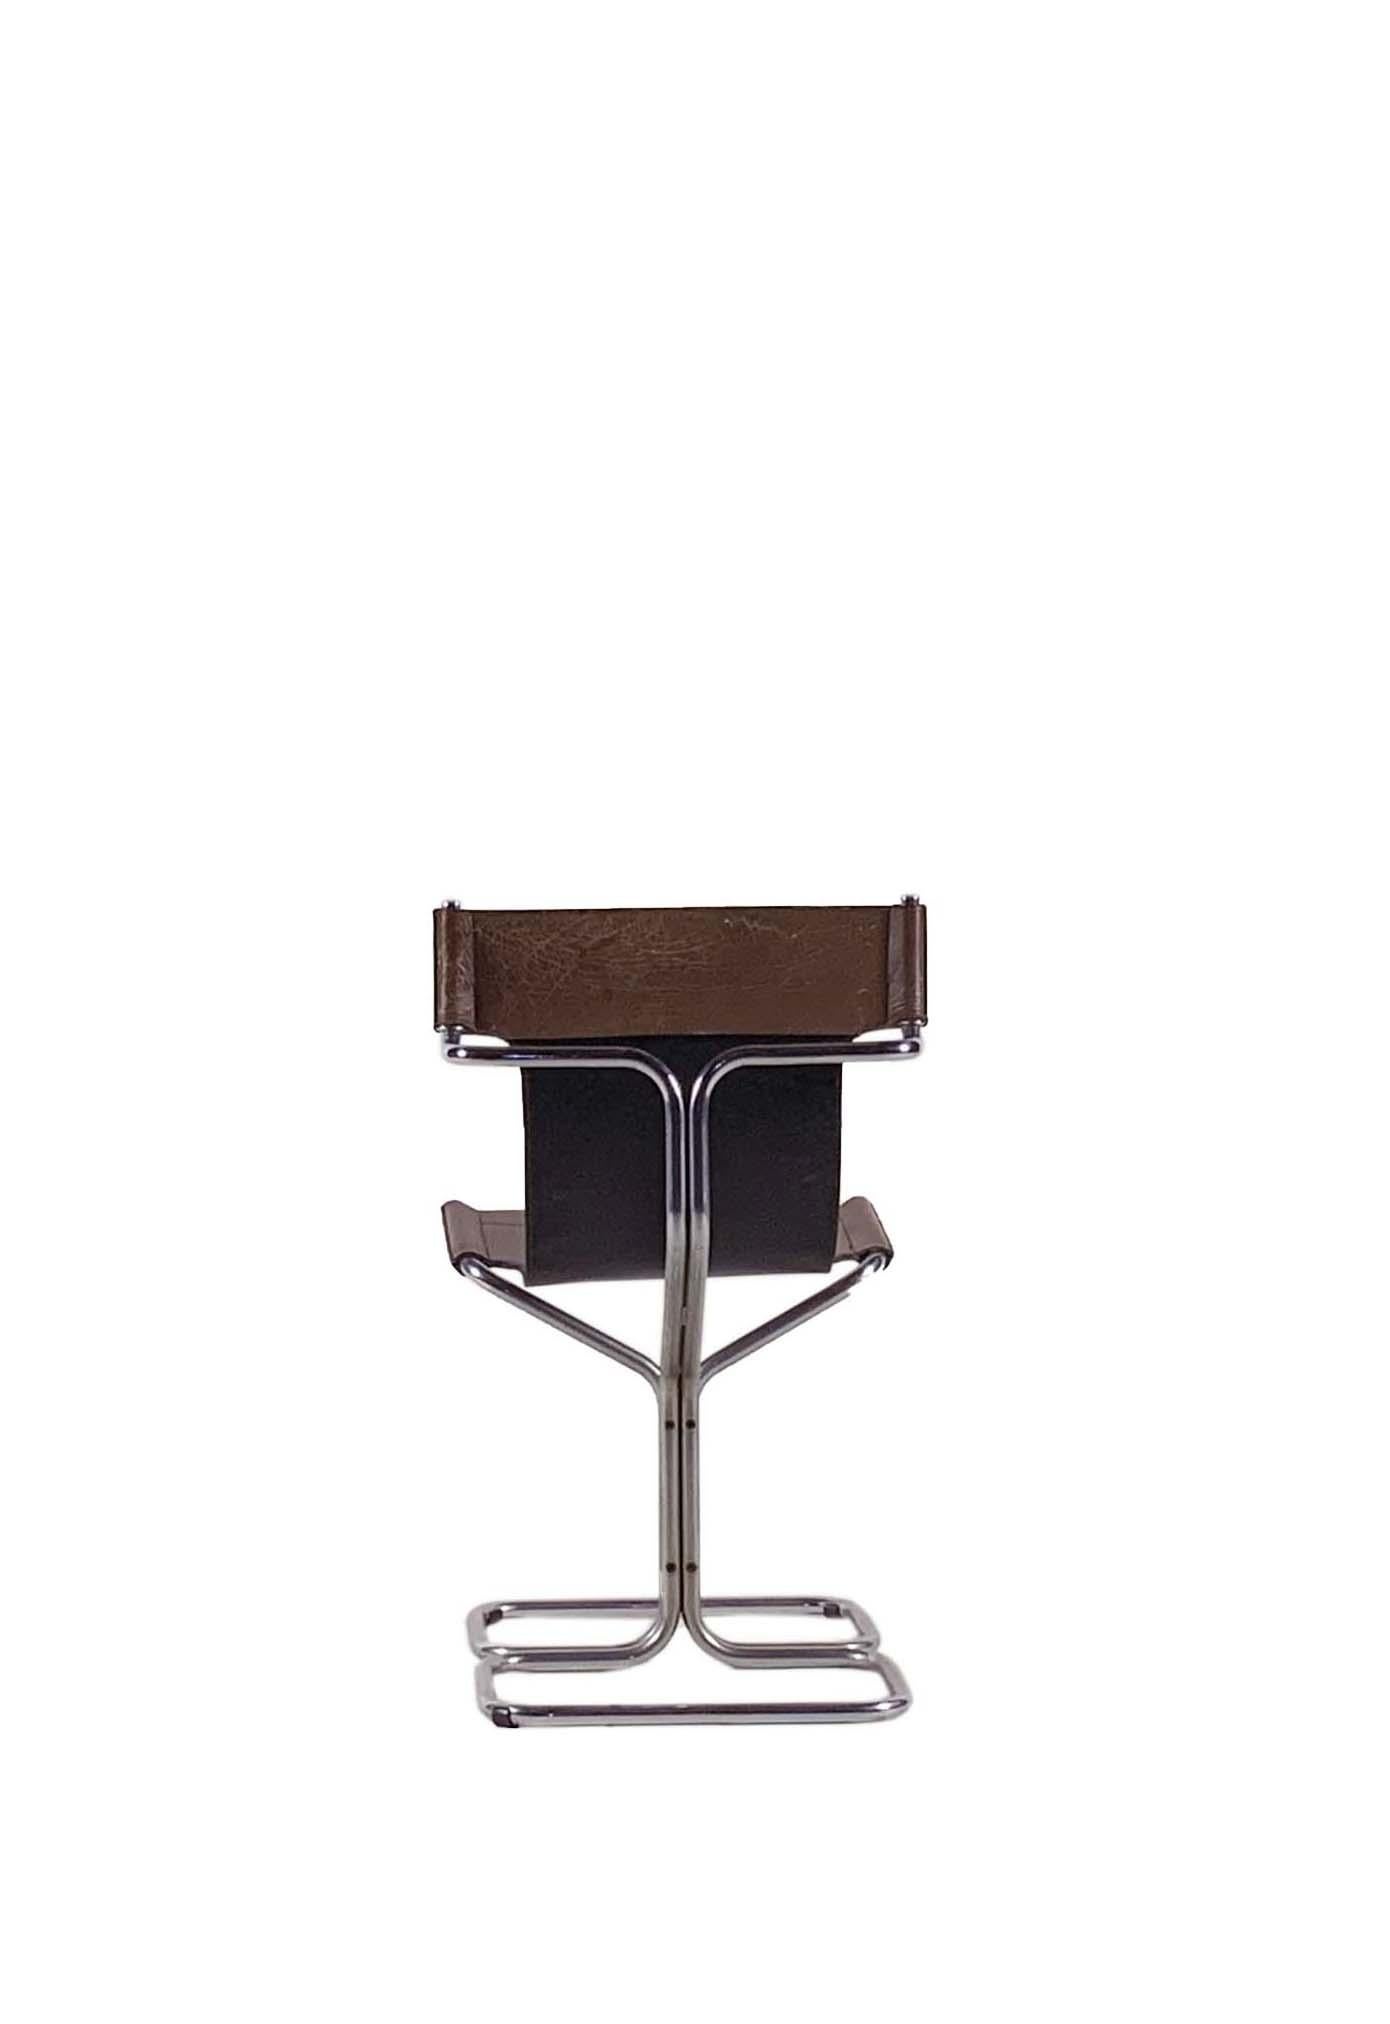 Italian Topos Chair by Gruppo Dam for Gruppo Industriale Busnelli, 1969 For Sale